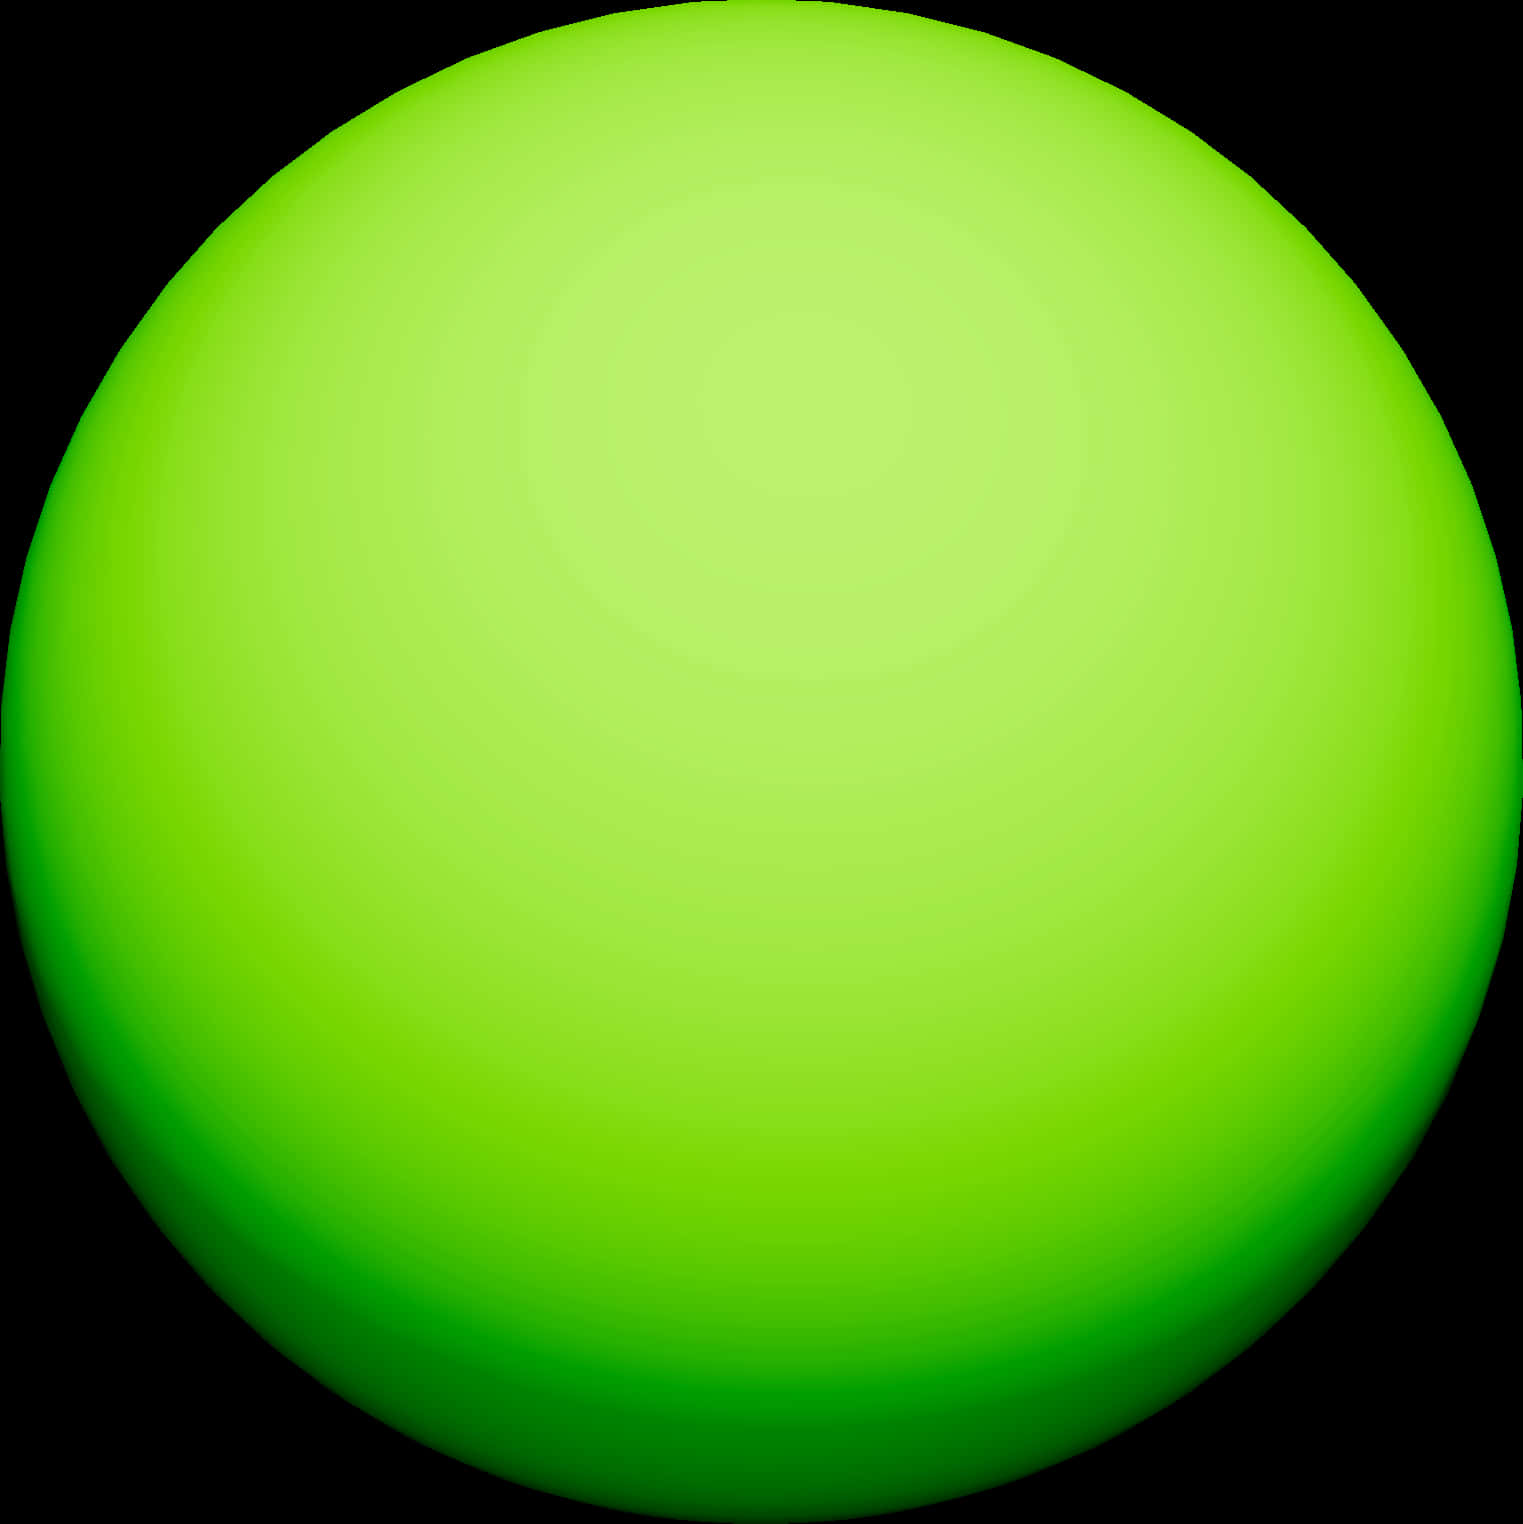 A Green Ball With Black Background